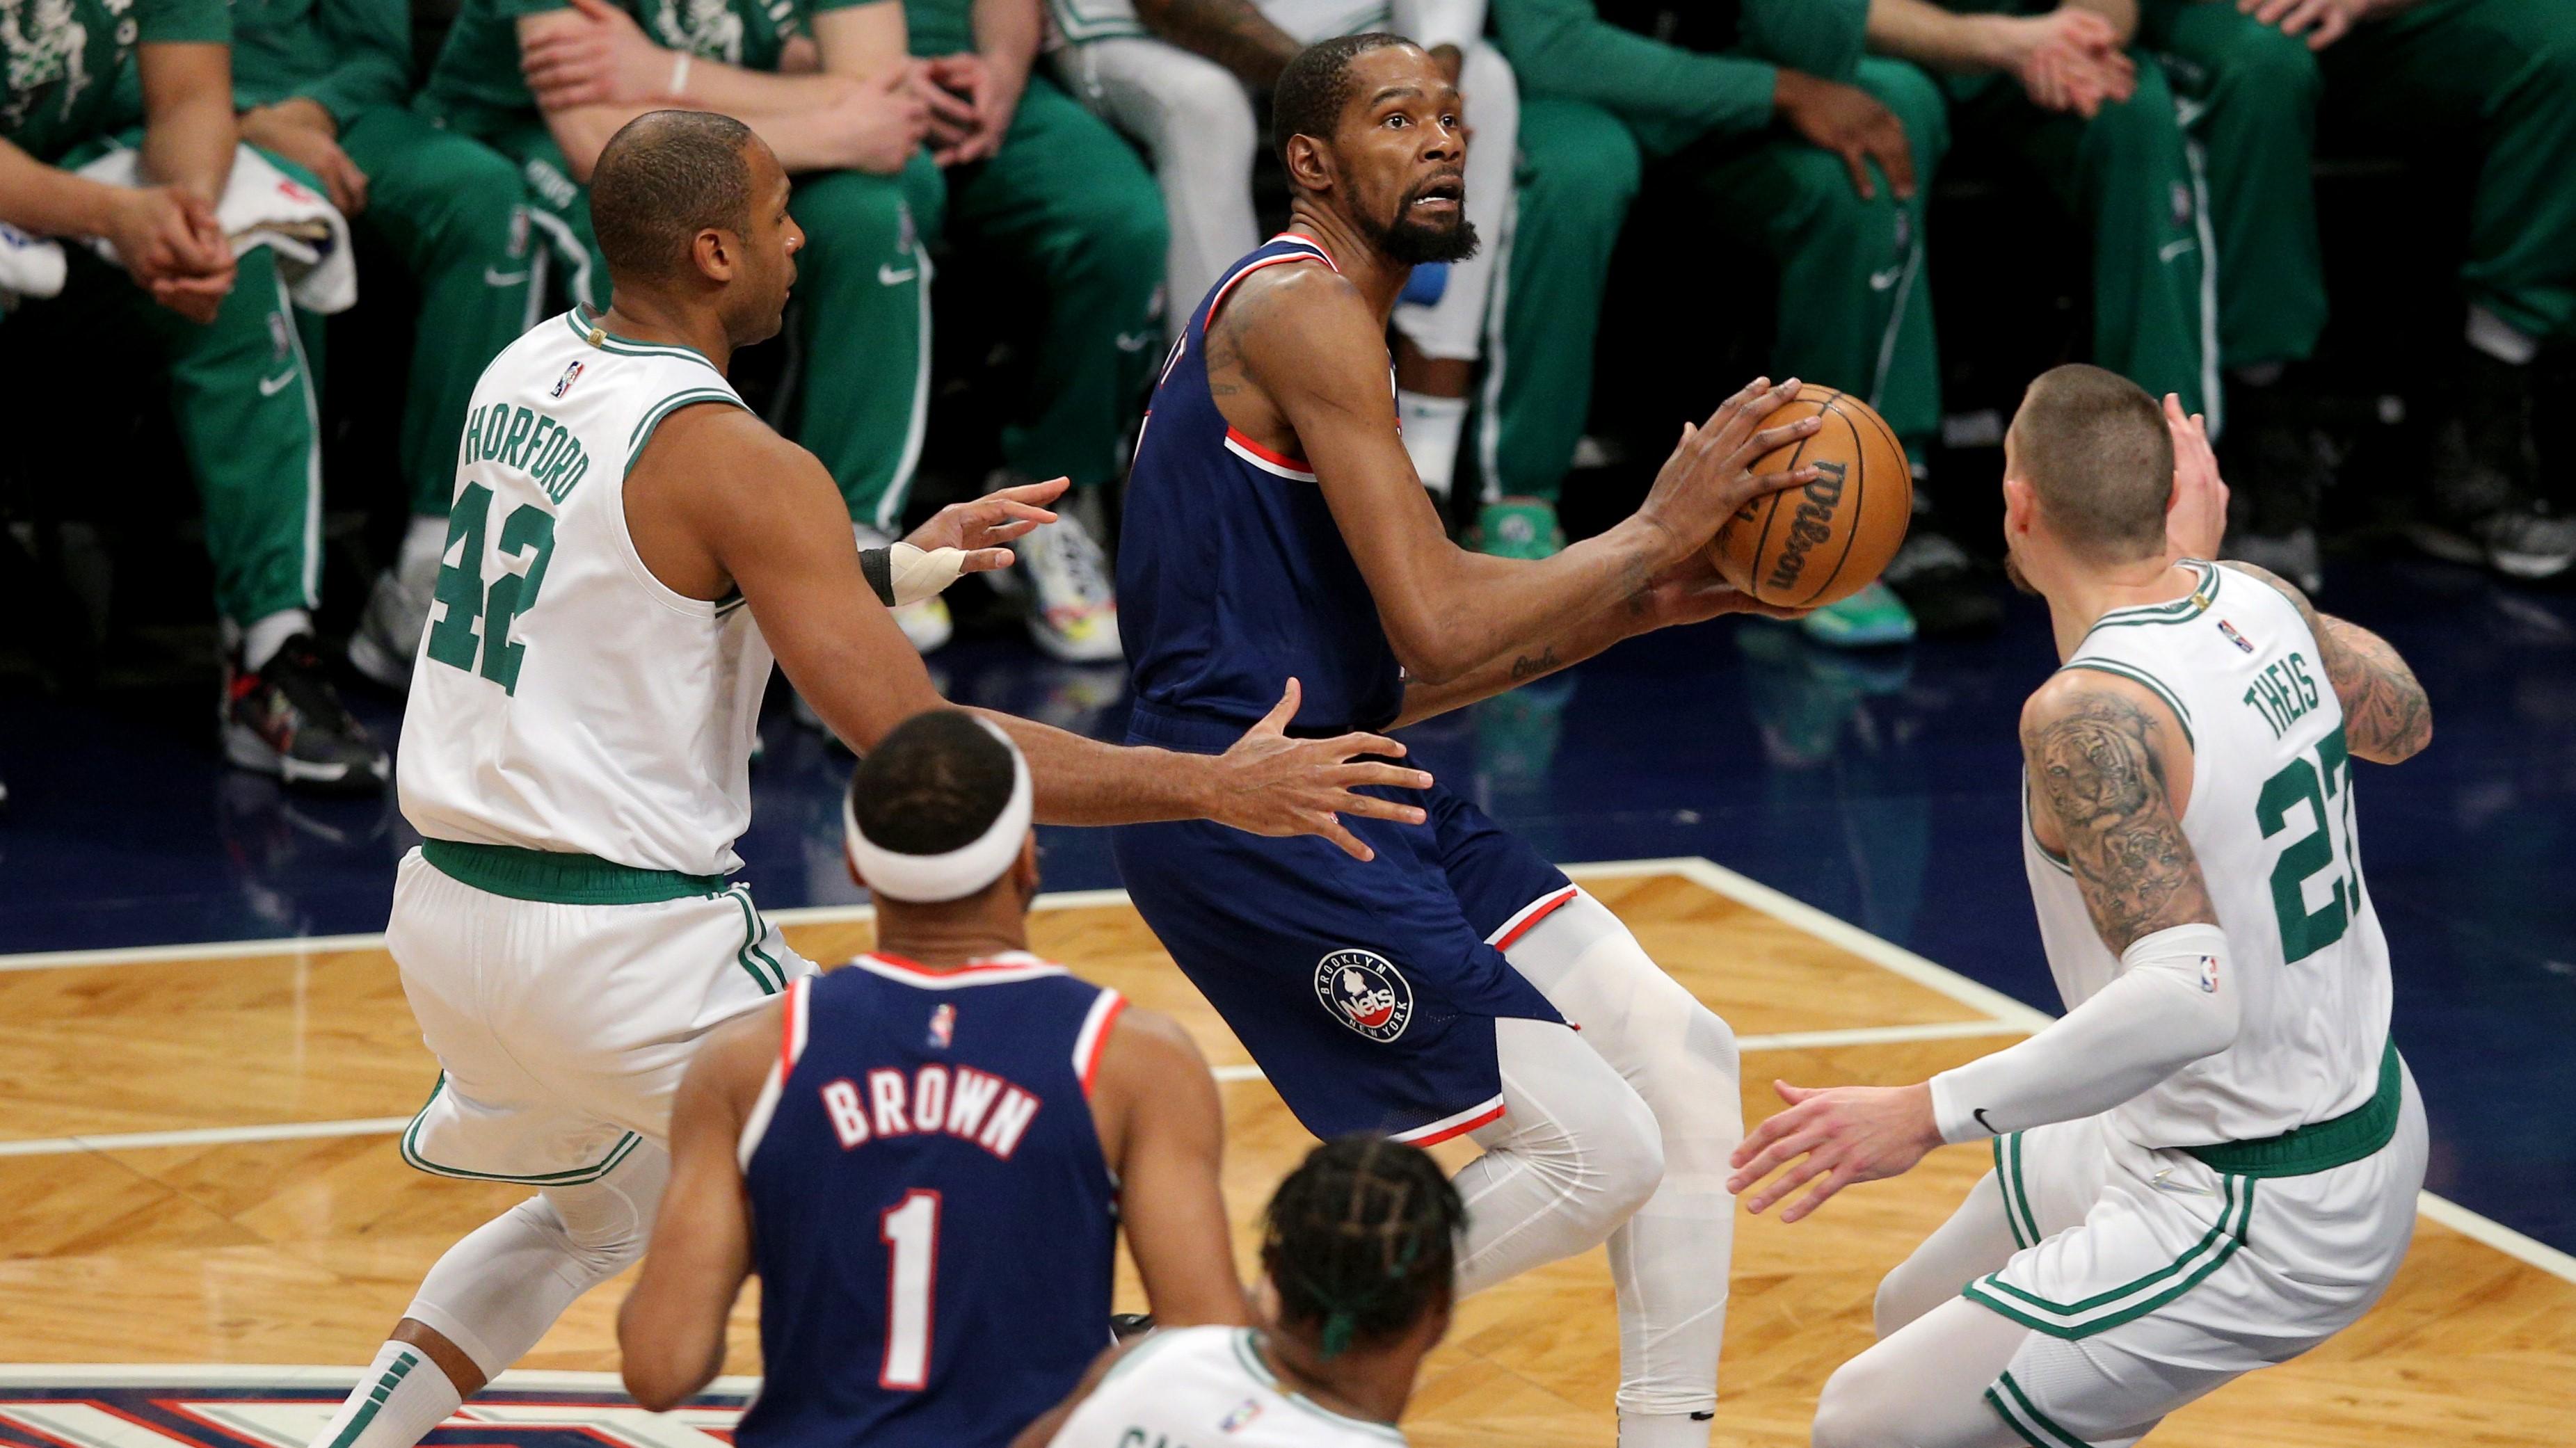 Apr 25, 2022; Brooklyn, New York, USA; Brooklyn Nets forward Kevin Durant (7) drives to the basket against Boston Celtics center Al Horford (42) and center Daniel Theis (27) during the first quarter of game four of the first round of the 2022 NBA playoffs at Barclays Center. / Brad Penner-USA TODAY Sports